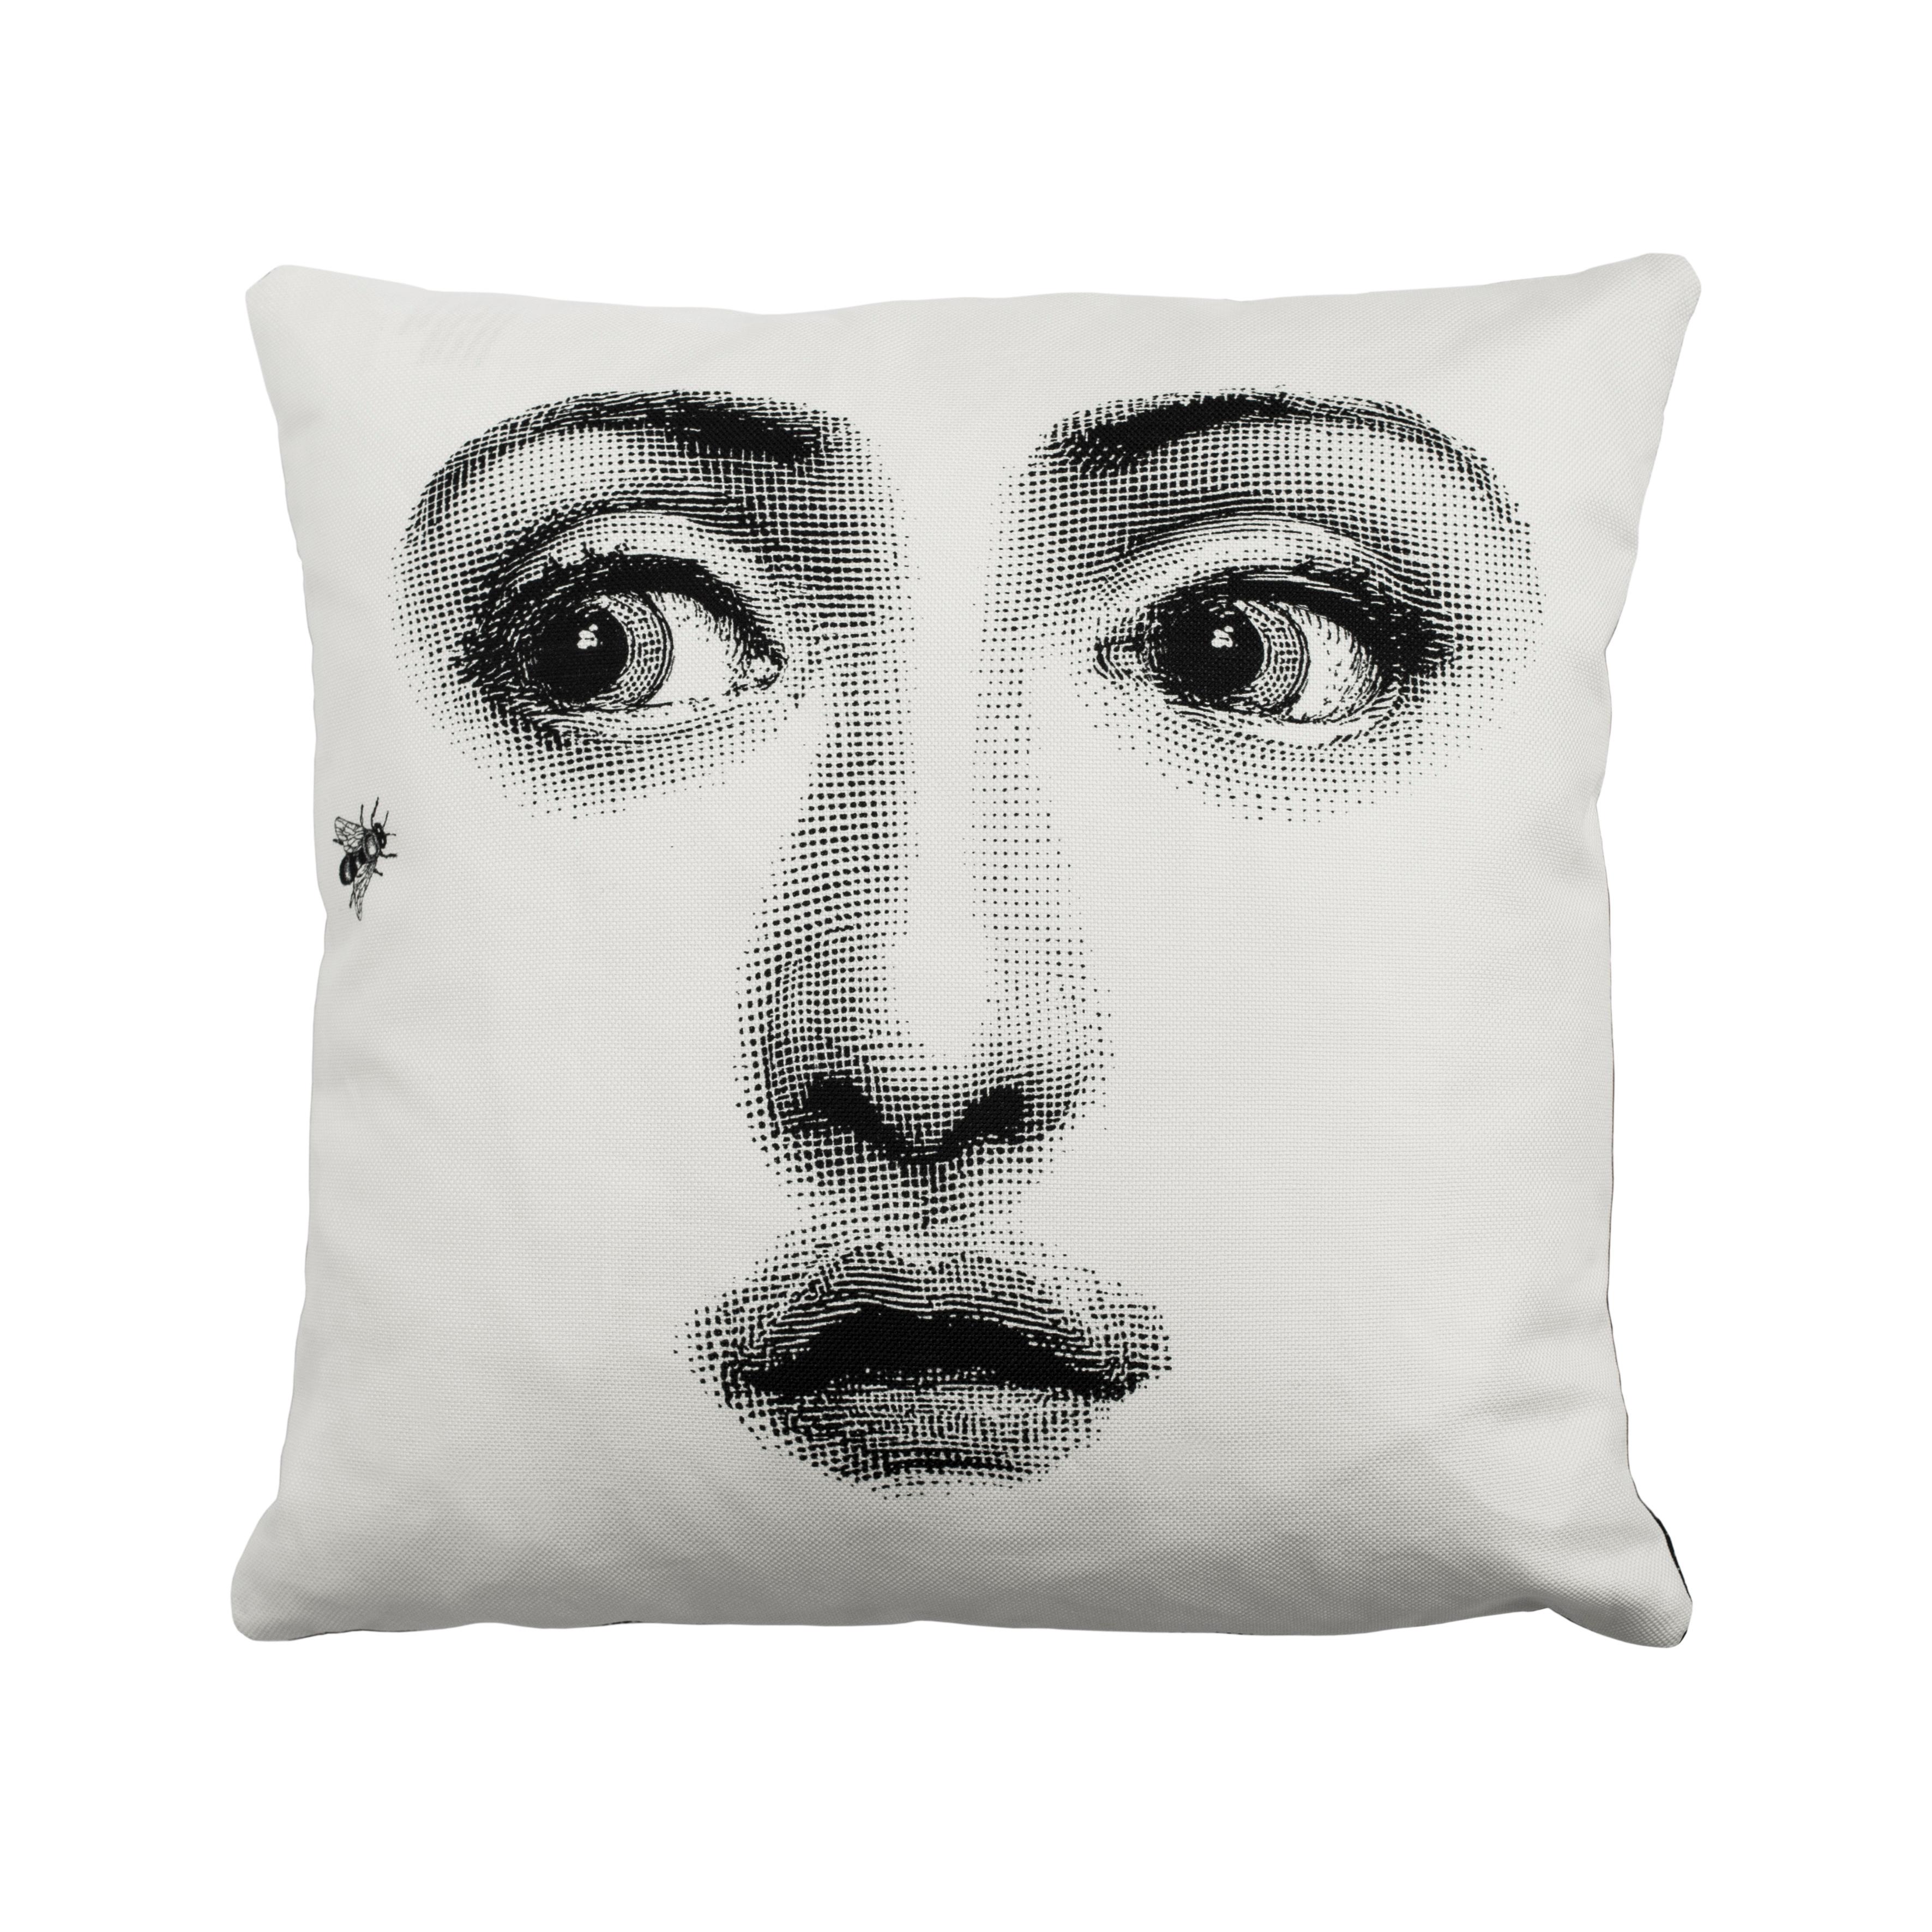 The Fornasetti cushions will add to each room an unexpected detail thanks to the most iconic Italian atelier designs. 

The decoration features two variations from the famous Fornasetti series Tema e Variazioni, inspired by the face of the